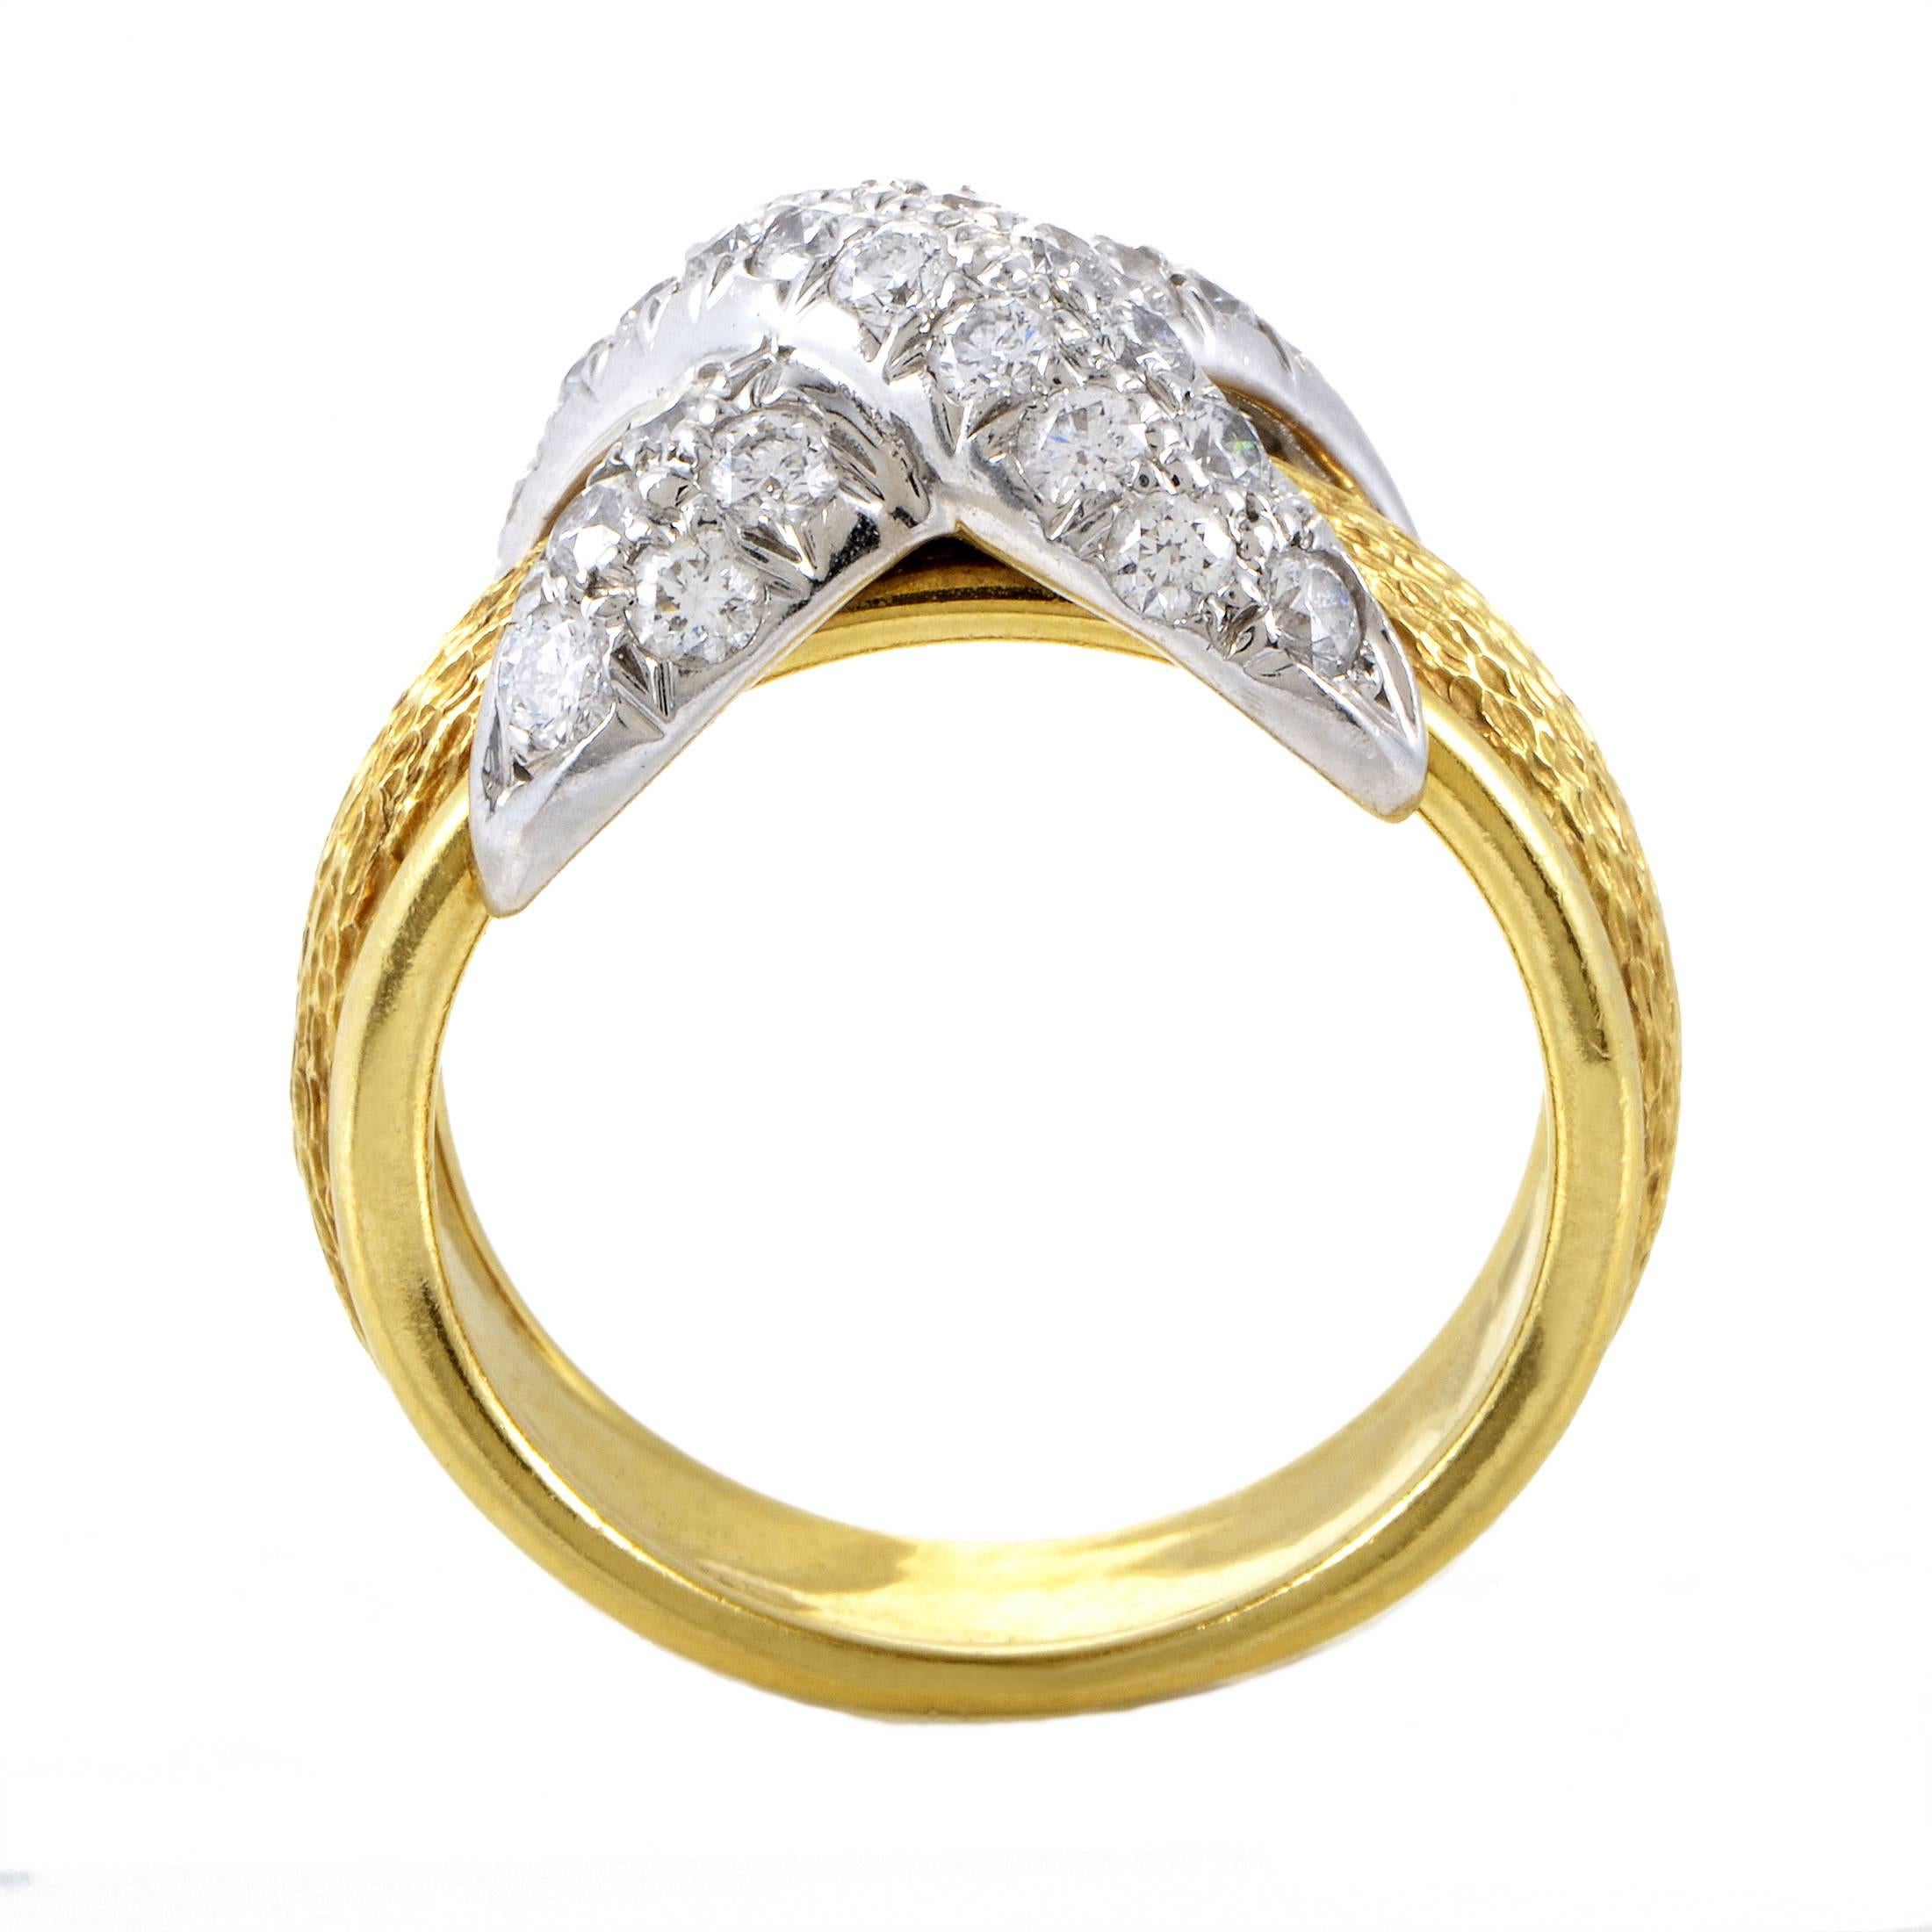 Embellished with resplendent diamonds weighing in total 1.00 carat and firmly embracing the intricately ornamented 18K yellow gold band, the fantastic platinum charm adds eye-catching brightness to this exceptional ring designed by Jean Schlumberger